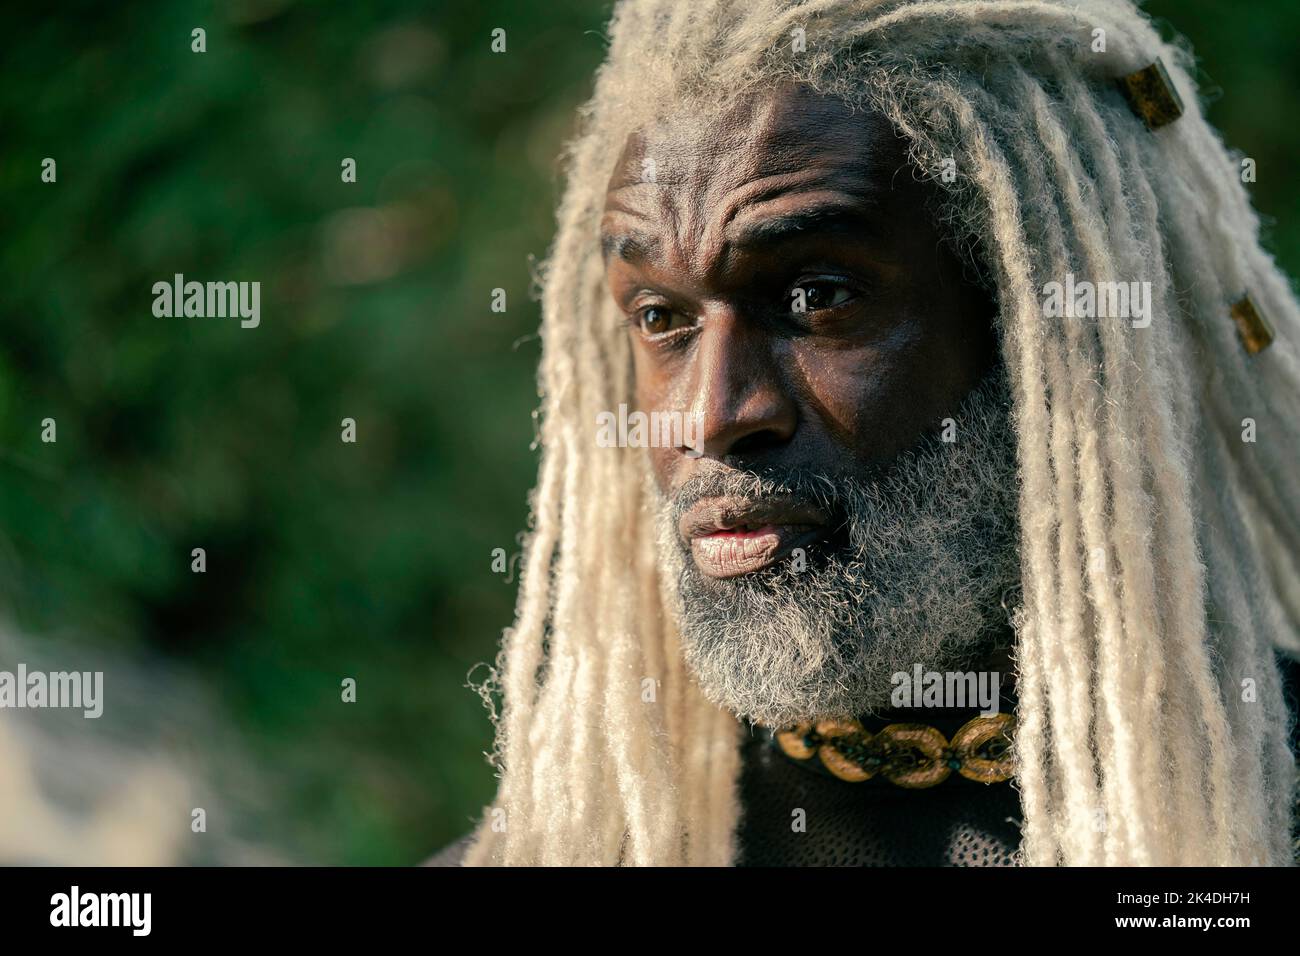 STEVE TOUSSAINT in HOUSE OF THE DRAGON (2022), directed by CLARE KILNER and MIGUEL SAPOCHNIK. Credit: HBO / Good Banana / Album Stock Photo